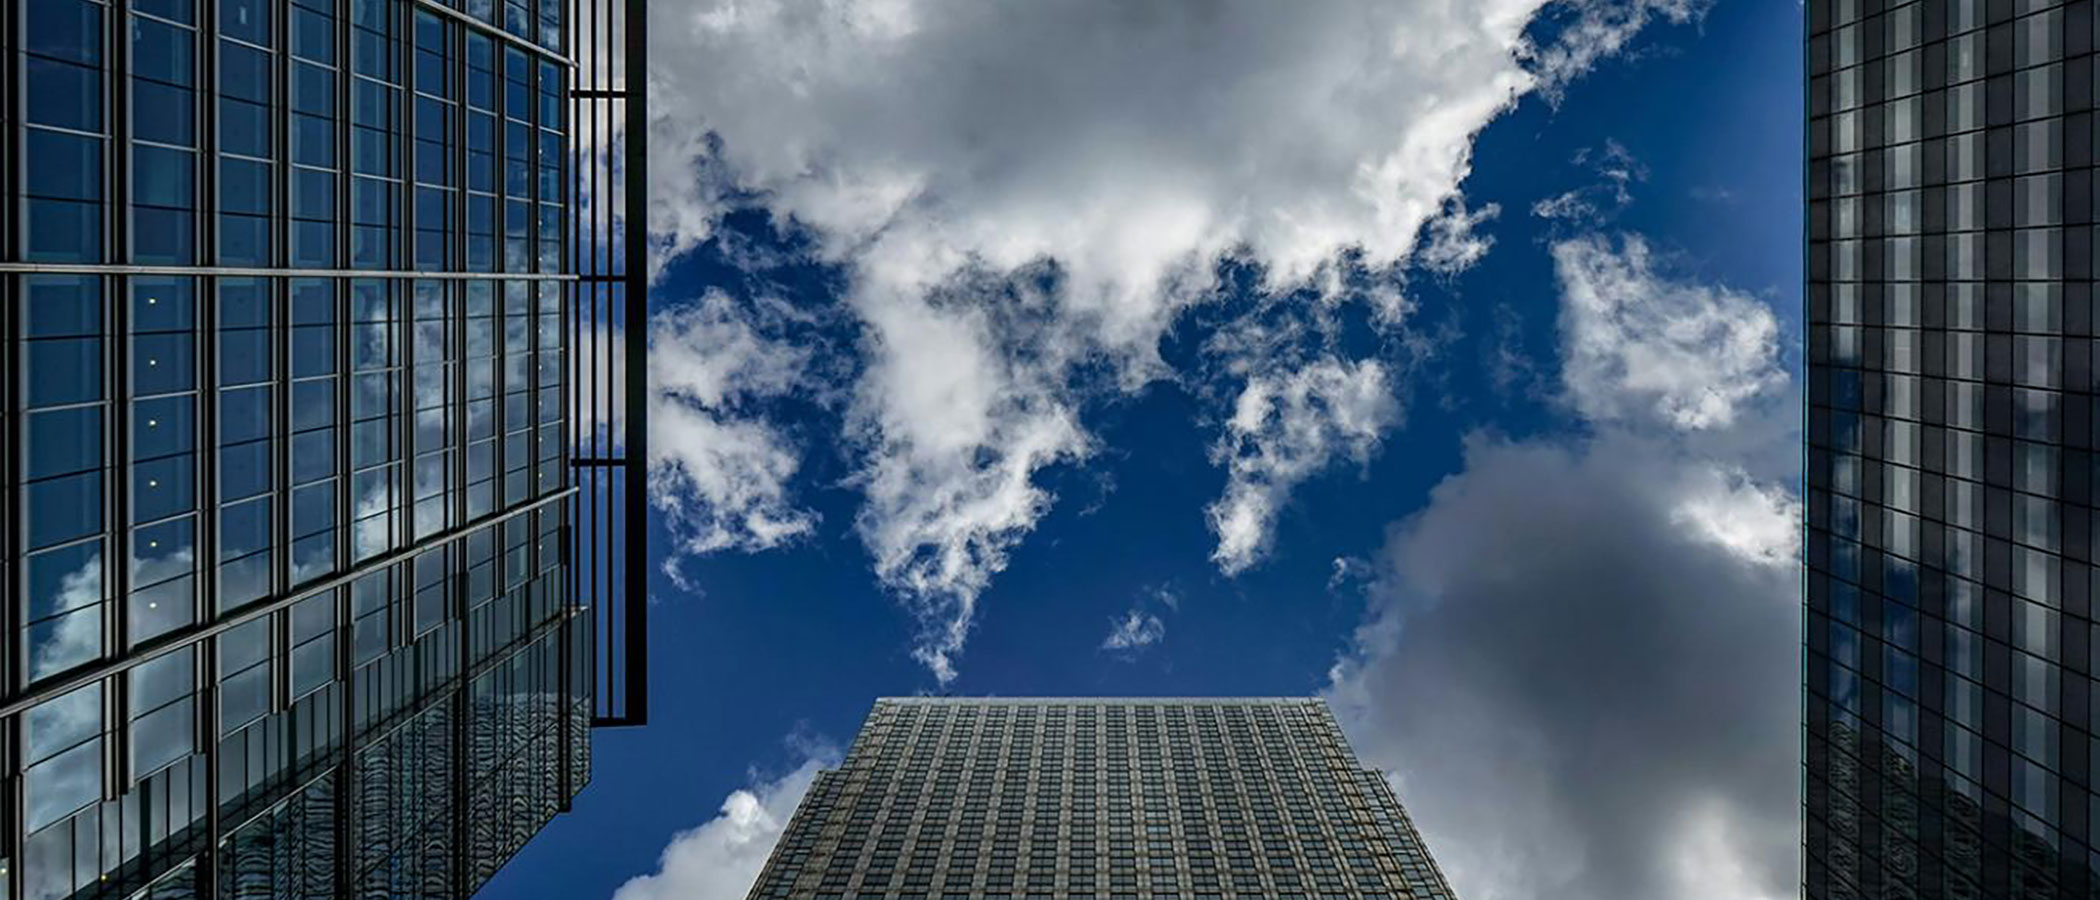 Looking up between tall glass buildings toward sky and clouds